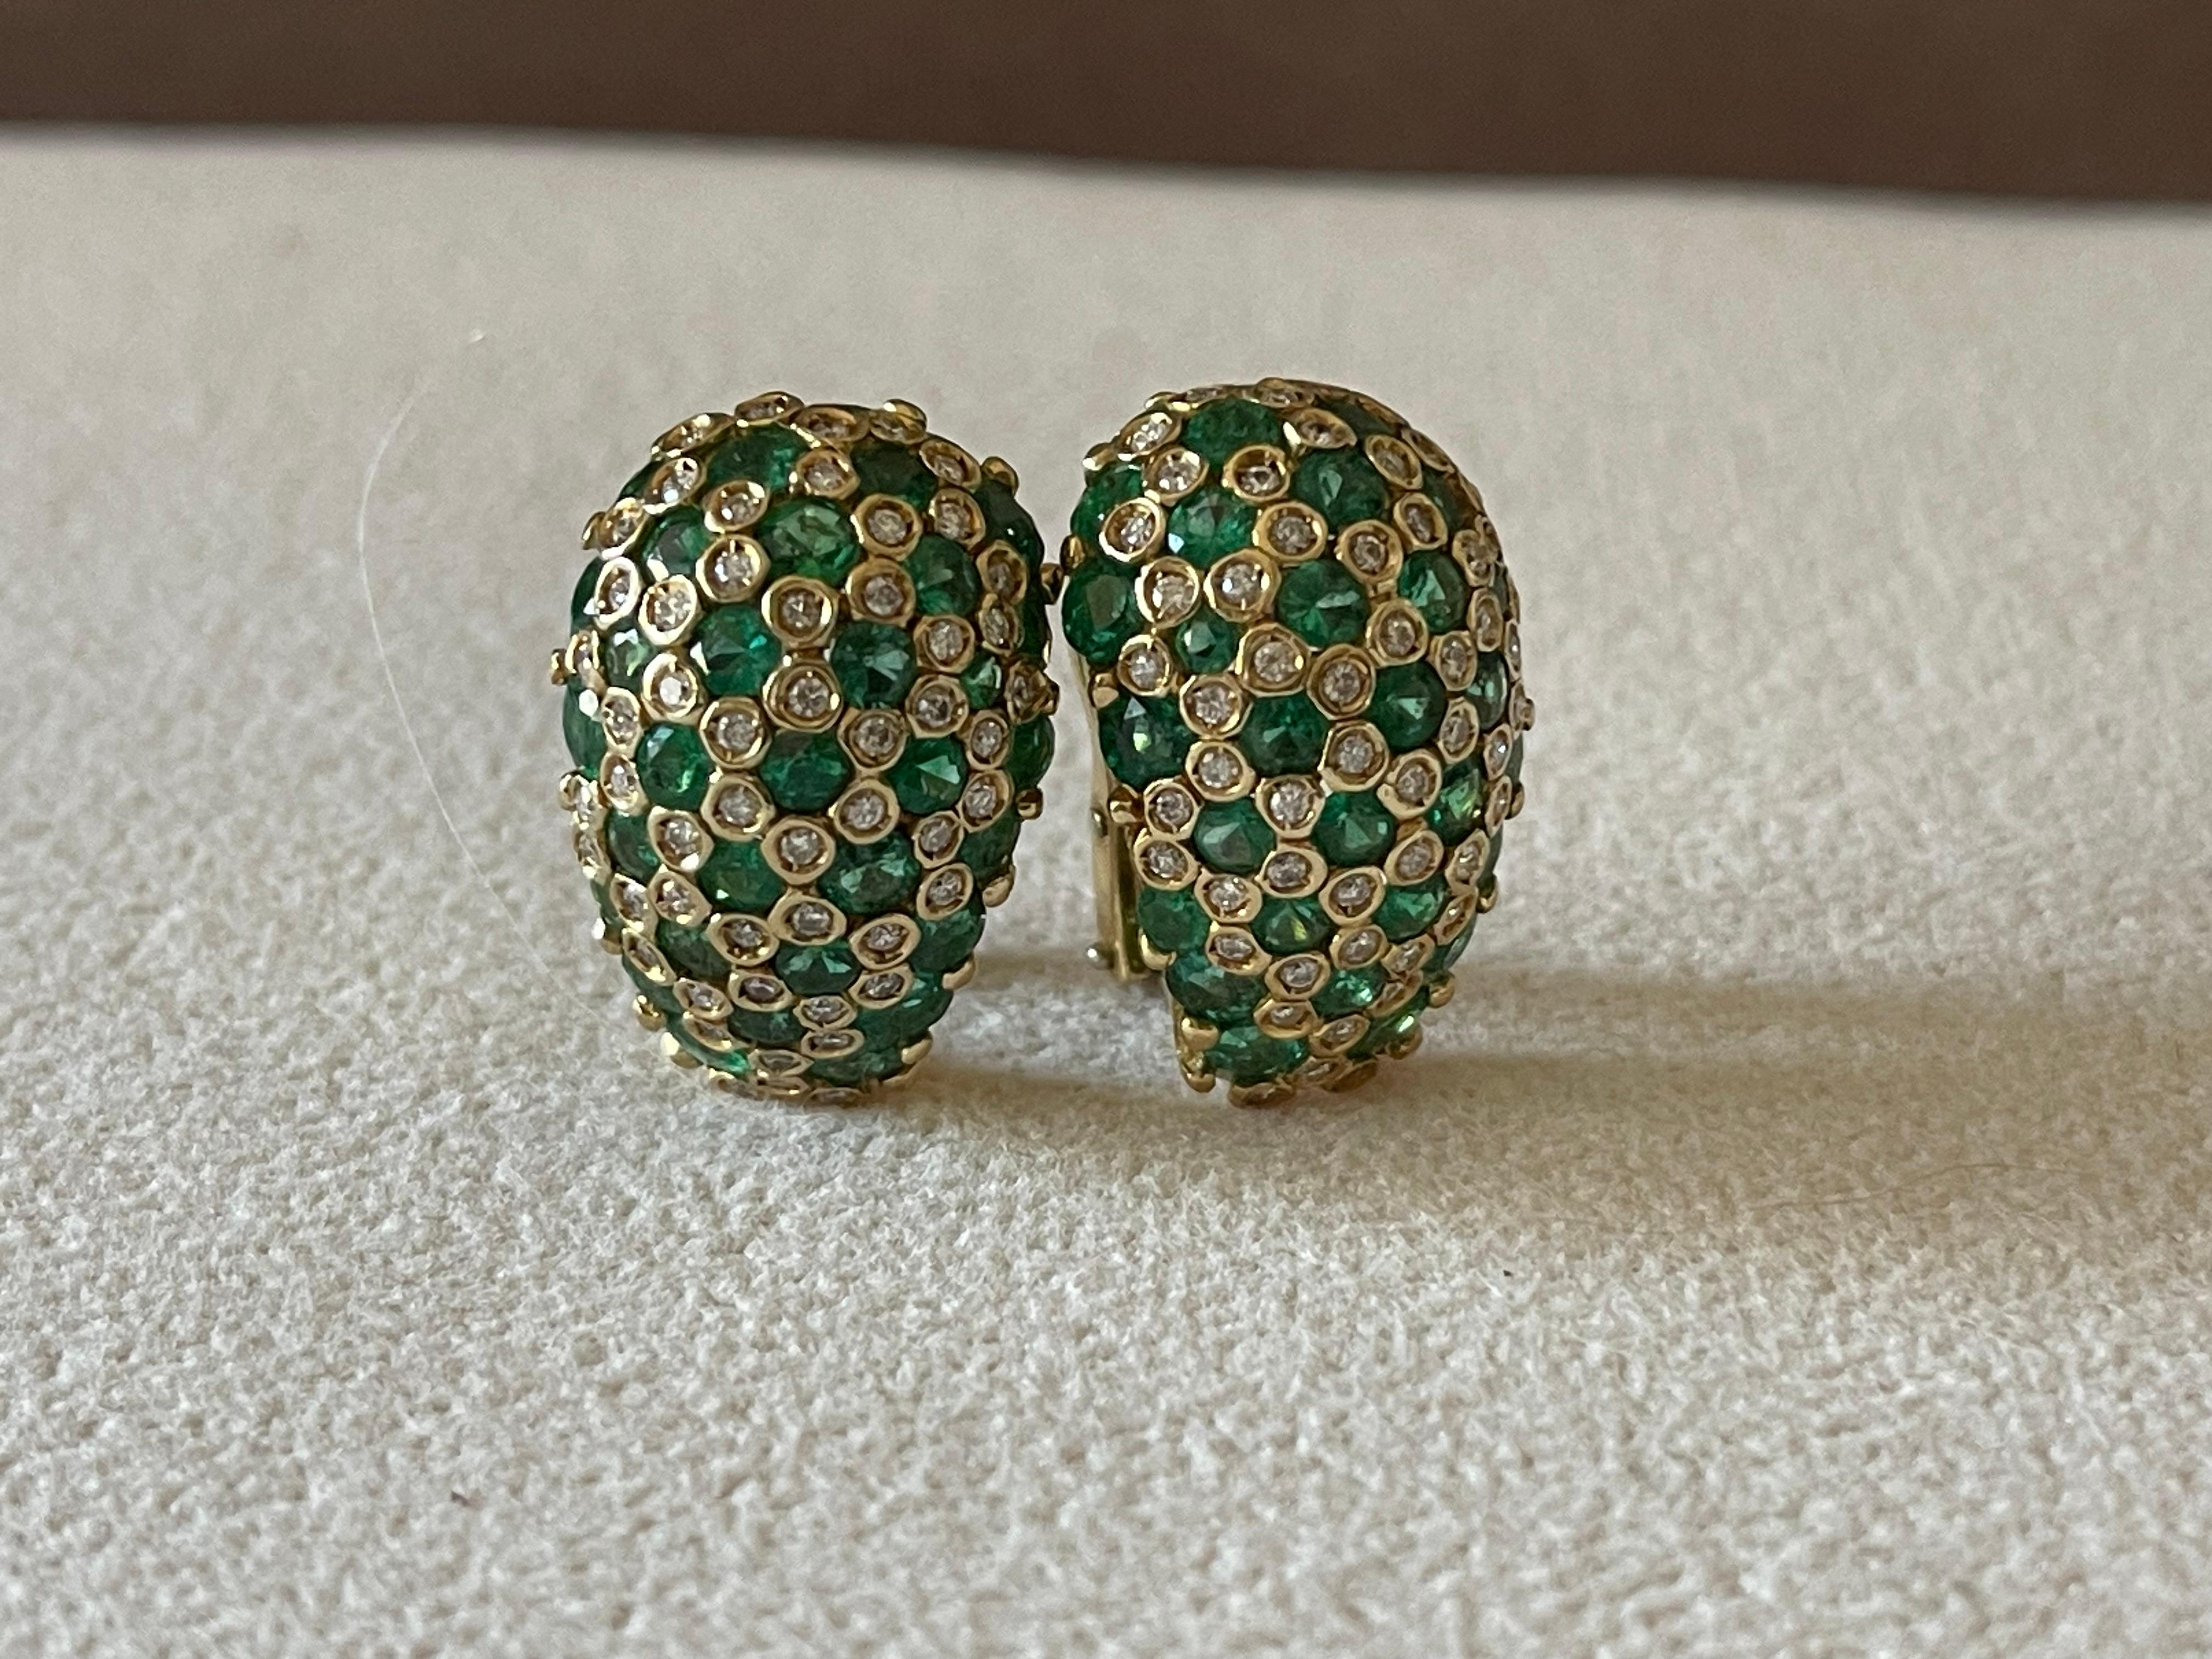 A timeless pair of Vintage earrings in 18 K yellow Gold featuring 64 vivid green round Emeralds weiging ca. 5.50 ct  and brilliant cut Diamonds. Made in 18 K yellow Gold with italian marks. 
The Omega-back style caters for pierced ears only. These